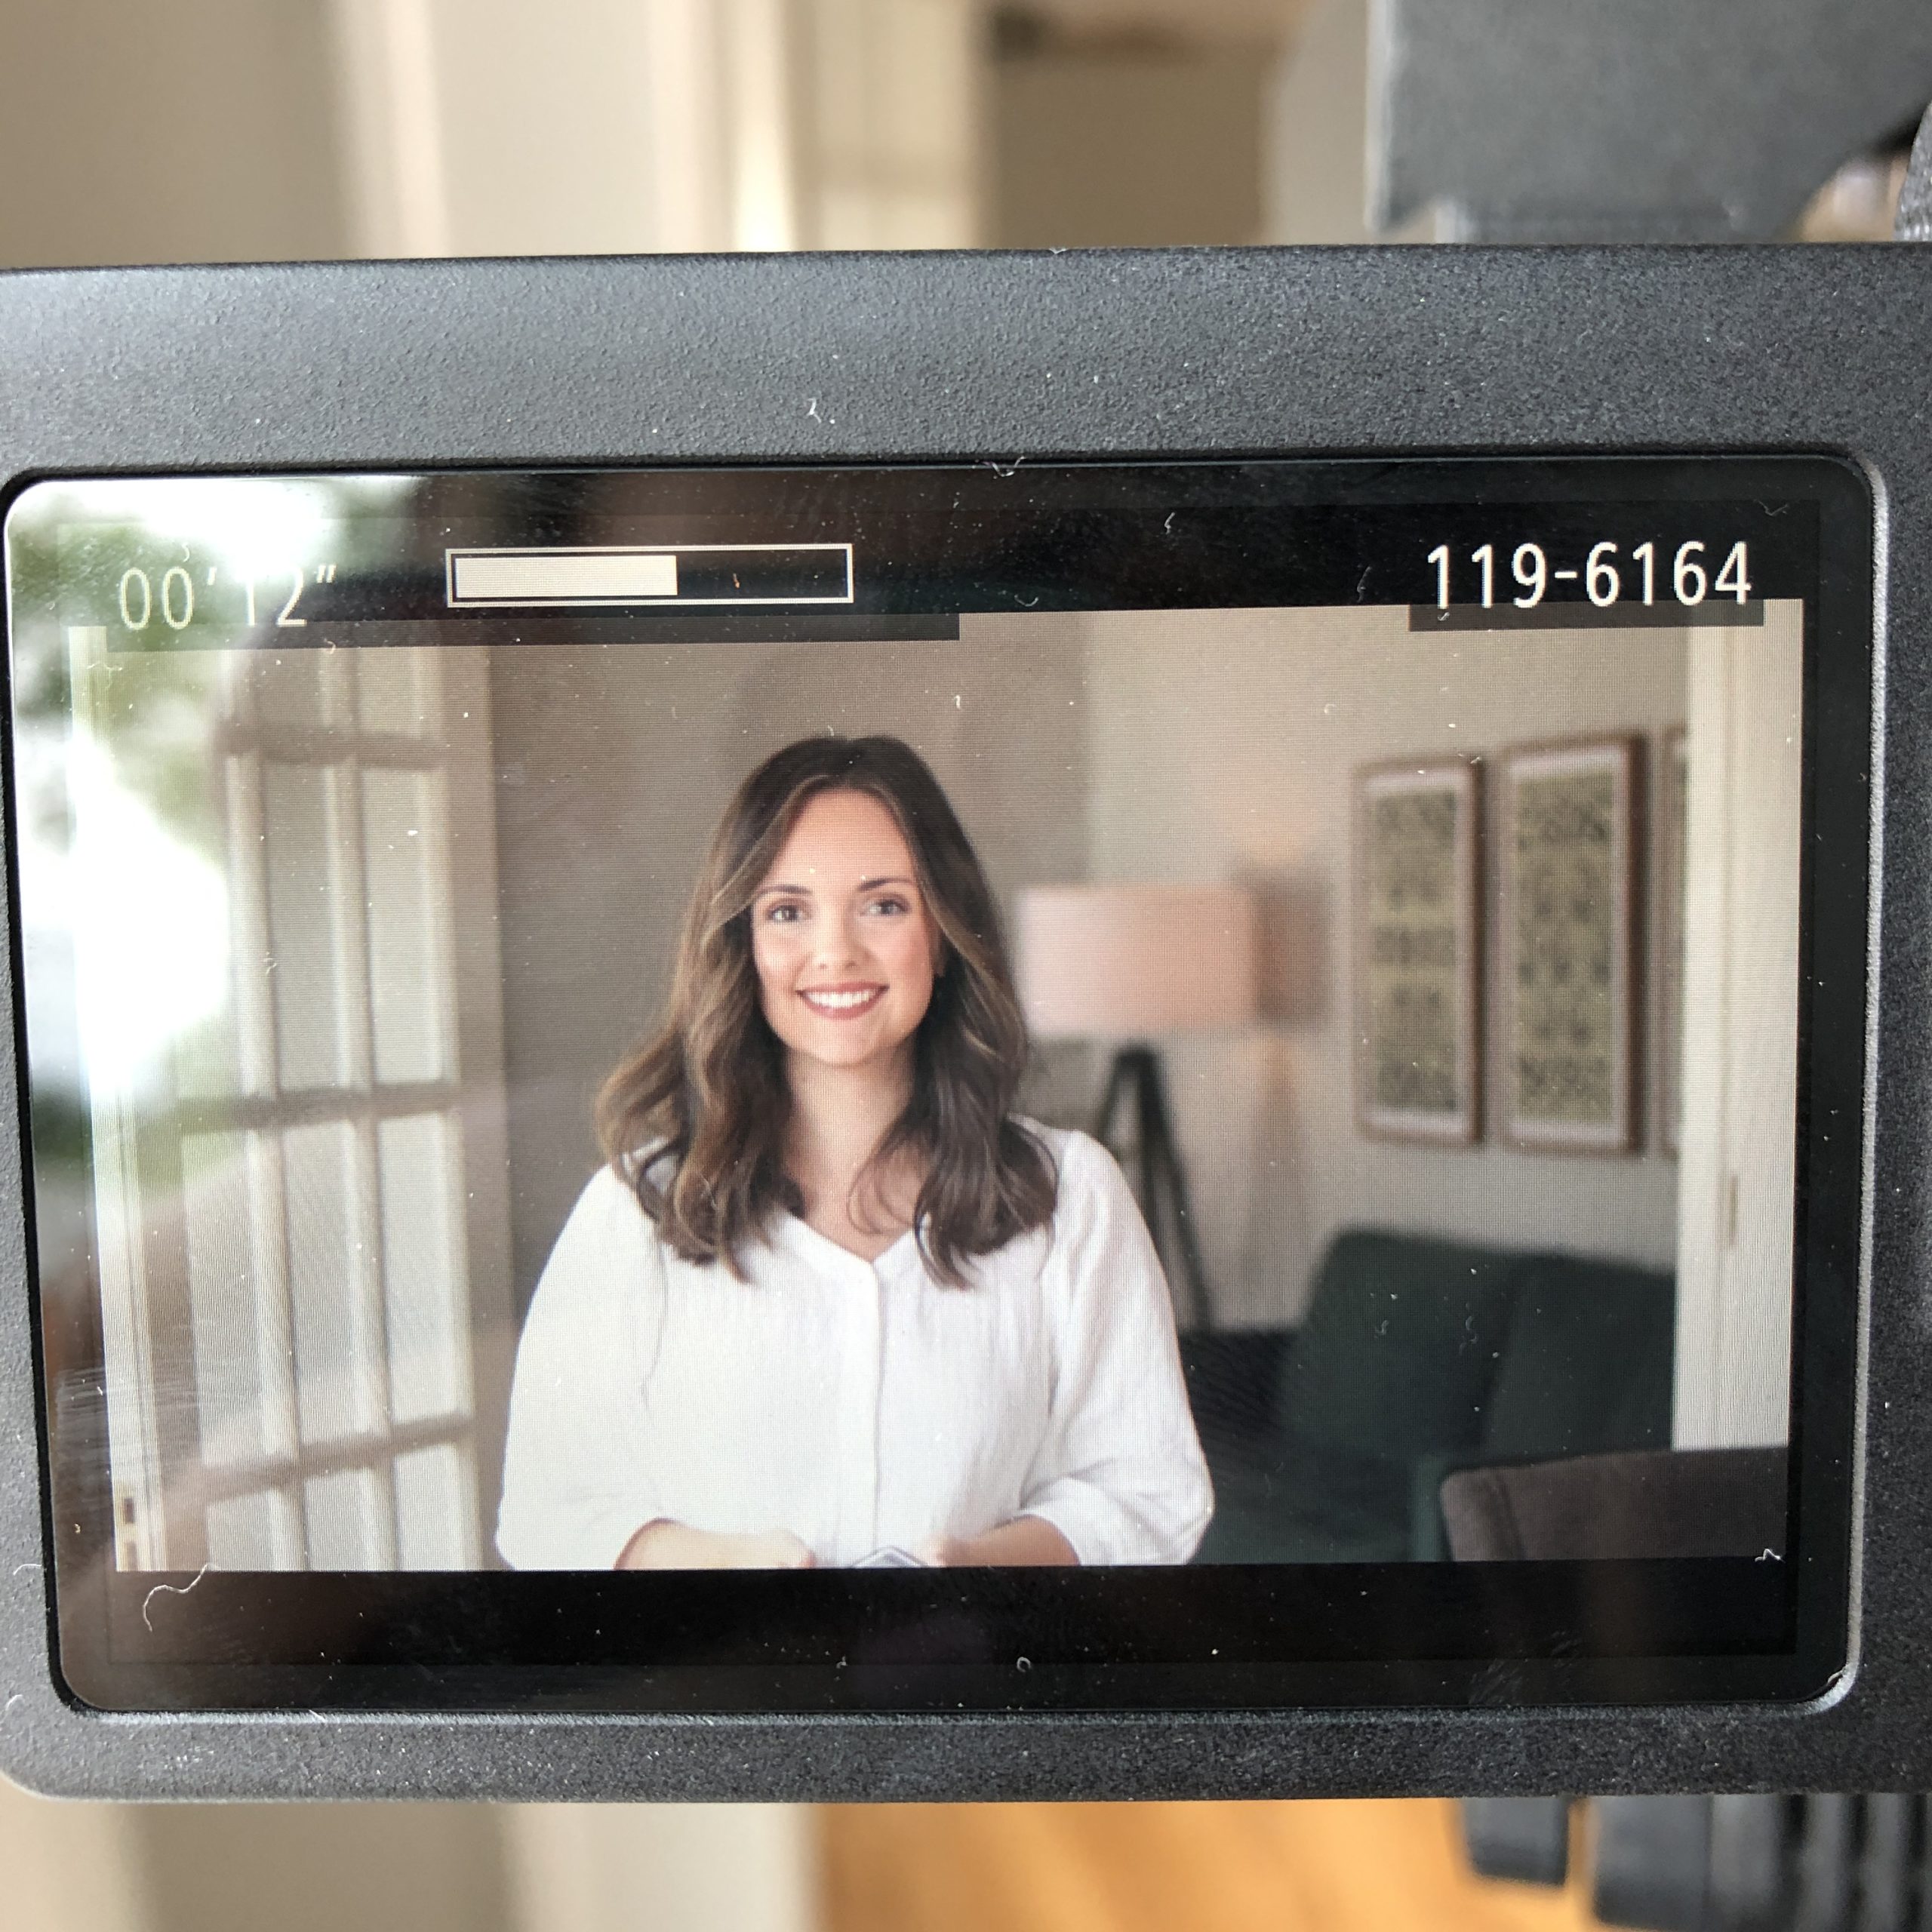 Behind the Scenes of Filming an Online Course